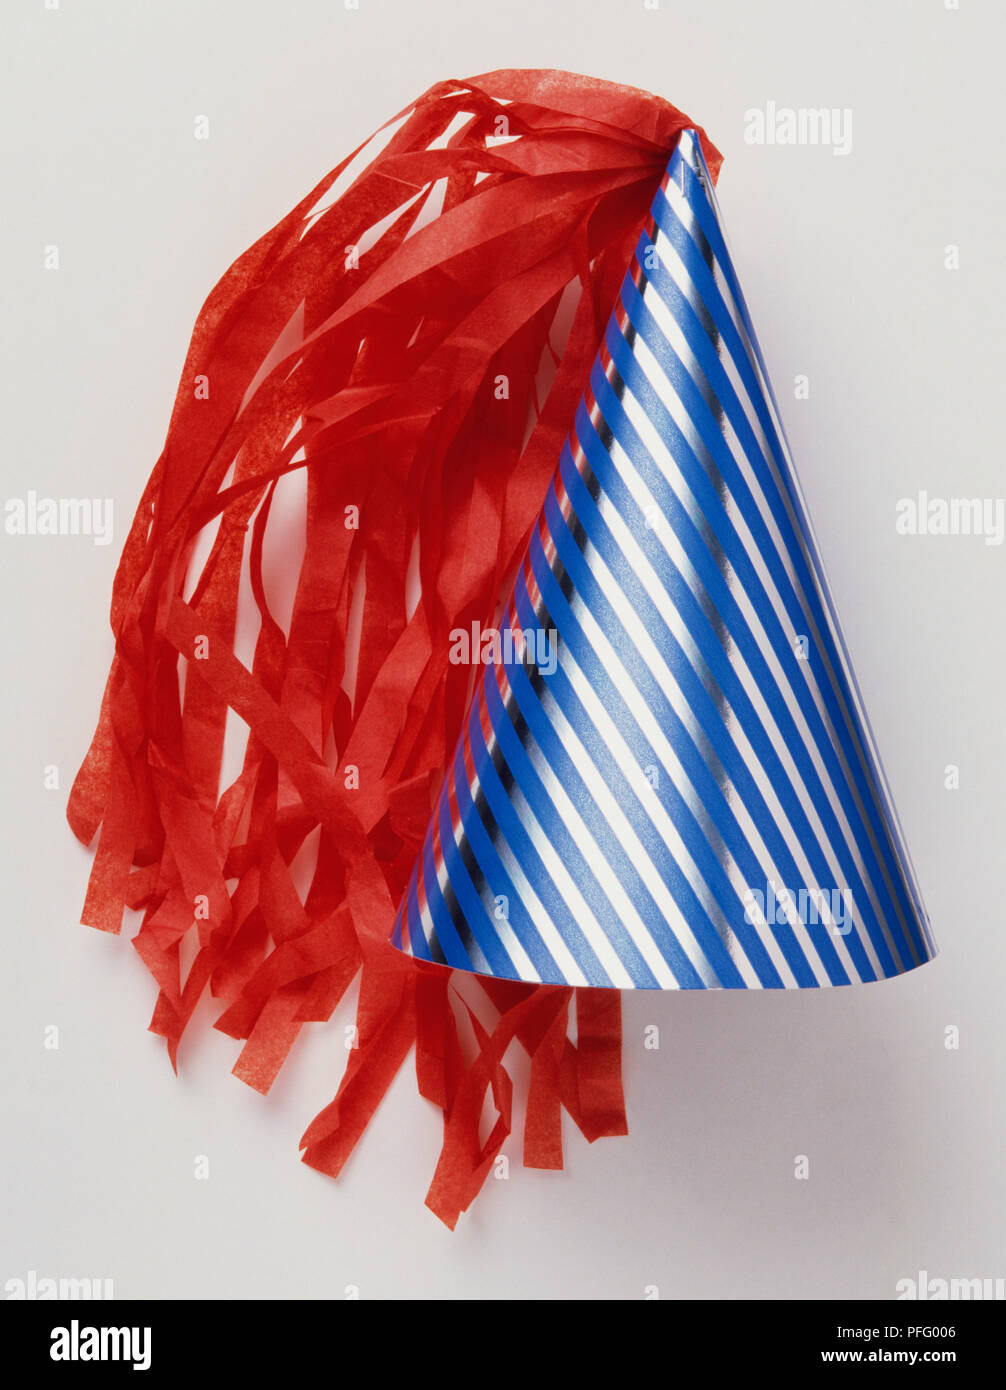 Red curl party streamers hanging hi-res stock photography and images - Alamy